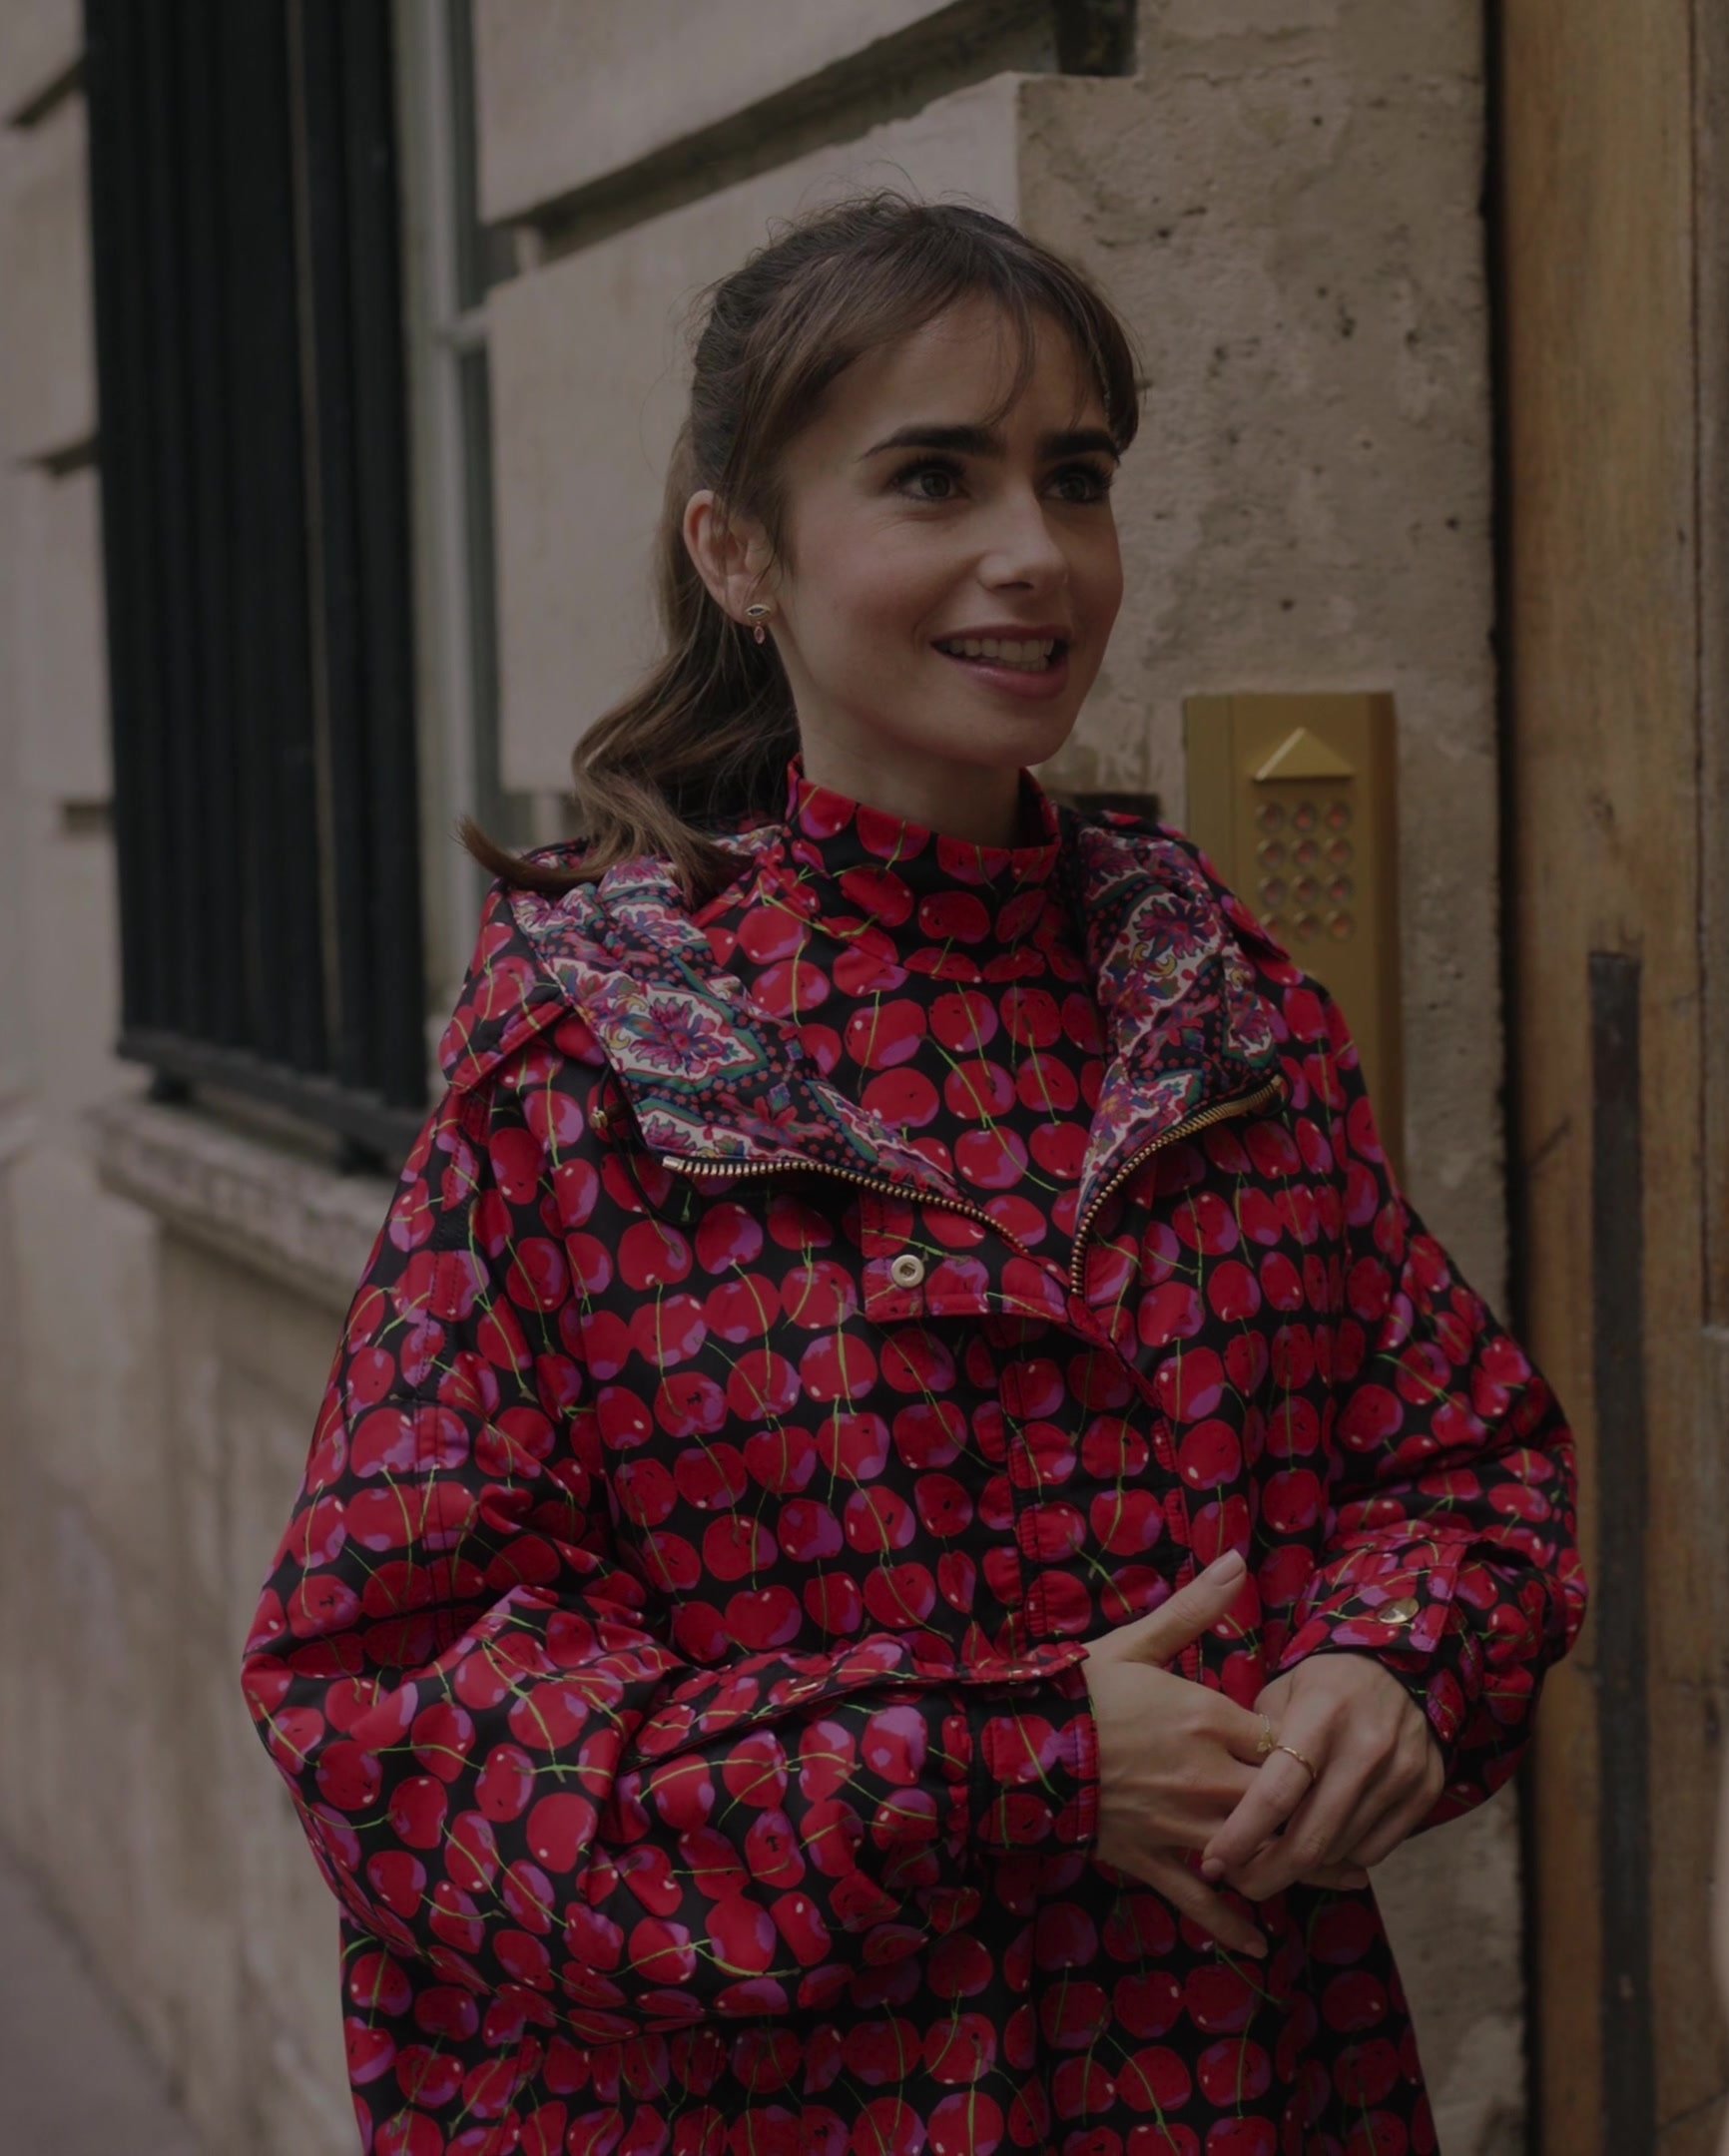 Worn on Emily in Paris TV Show - Cherry Print Oversized Jacket Worn by Lily Collins as Emily Cooper